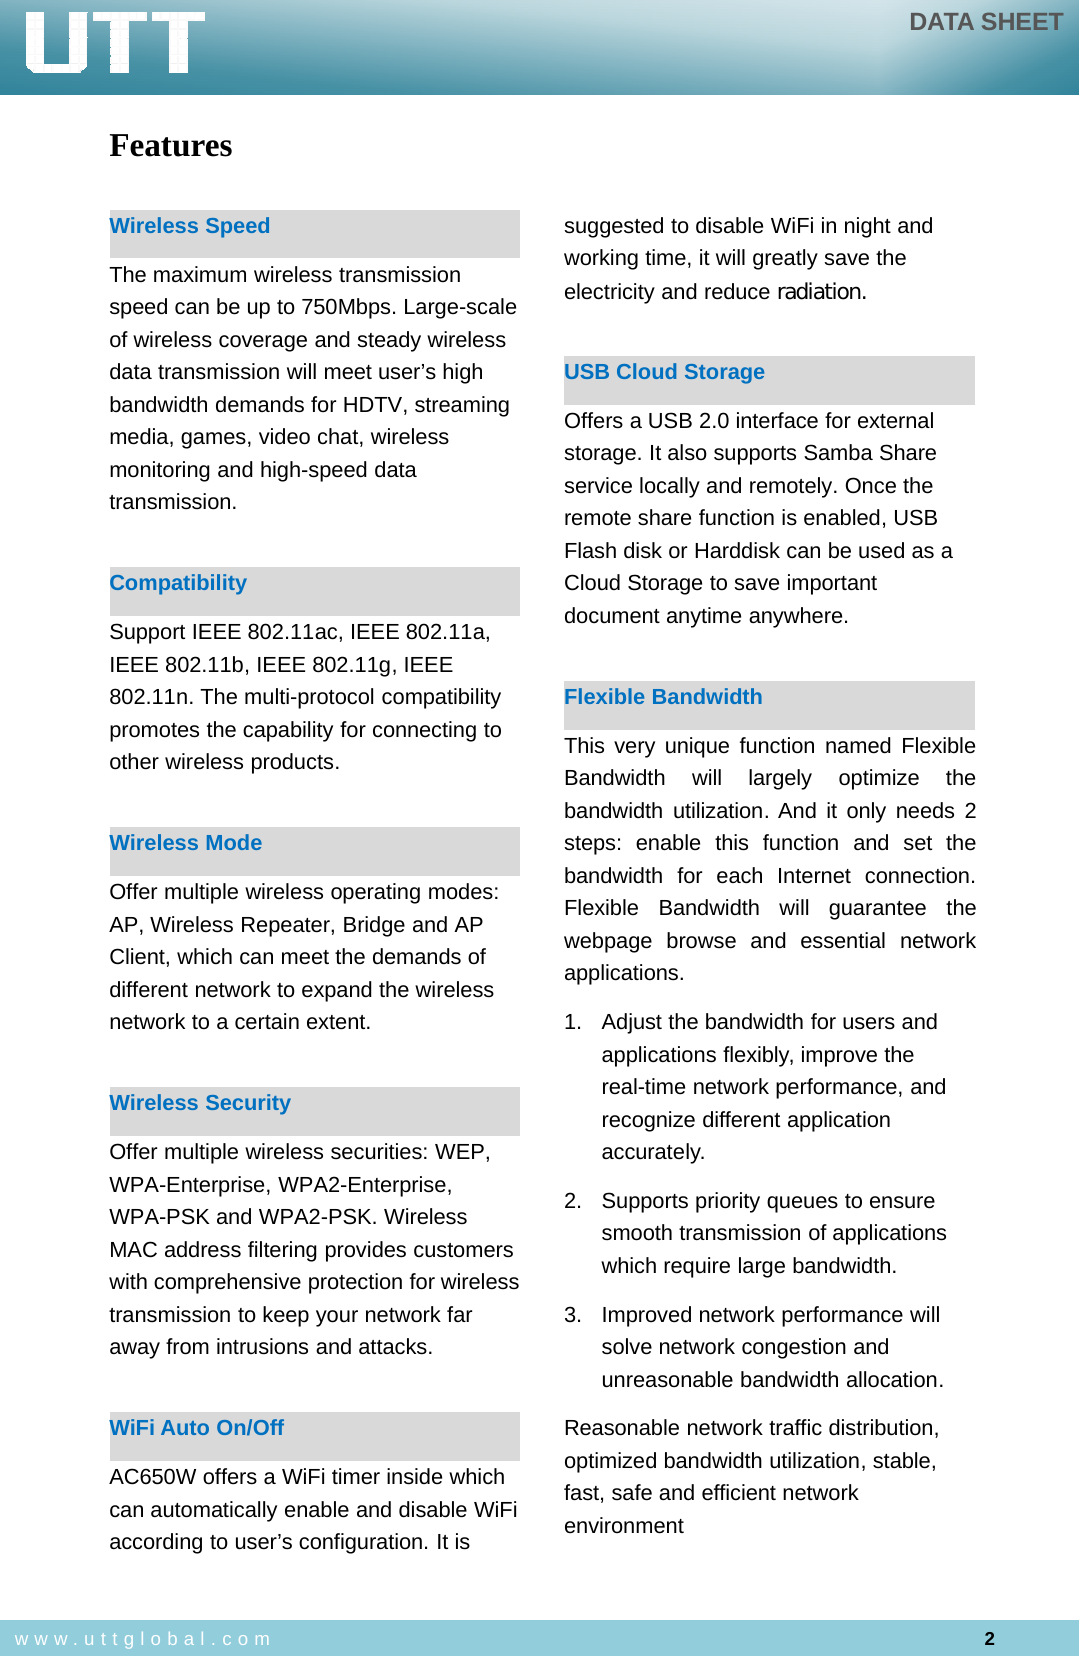 DATA SHEET2www.uttglobal.comFeaturesWireless SpeedThe maximum wireless transmissionspeed can be up to 750Mbps. Large-scaleof wireless coverage and steady wirelessdata transmission will meet user’s highbandwidth demands for HDTV, streamingmedia, games, video chat, wirelessmonitoring and high-speed datatransmission.CompatibilitySupport IEEE 802.11ac, IEEE 802.11a,IEEE 802.11b, IEEE 802.11g, IEEE802.11n. The multi-protocol compatibilitypromotes the capability for connecting toother wireless products.Wireless ModeOffer multiple wireless operating modes:AP, Wireless Repeater, Bridge and APClient, which can meet the demands ofdifferent network to expand the wirelessnetwork to a certain extent.Wireless SecurityOffer multiple wireless securities: WEP,WPA-Enterprise, WPA2-Enterprise,WPA-PSK and WPA2-PSK. WirelessMAC address filtering provides customerswith comprehensive protection for wirelesstransmission to keep your network faraway from intrusions and attacks.WiFi Auto On/OffAC650W offers a WiFi timer inside whichcan automatically enable and disable WiFiaccording to user’s configuration. It issuggested to disable WiFi in night andworking time, it will greatly save theelectricity and reduce radiation.USB Cloud StorageOffers a USB 2.0 interface for externalstorage. It also supports Samba Shareservice locally and remotely. Once theremote share function is enabled, USBFlash disk or Harddisk can be used as aCloud Storage to save importantdocument anytime anywhere.Flexible BandwidthThis very unique function named FlexibleBandwidth will largely optimize thebandwidth utilization. And it only needs 2steps: enable this function and set thebandwidth for each Internet connection.Flexible Bandwidth will guarantee thewebpage browse and essential networkapplications.1. Adjust the bandwidth for users andapplications flexibly, improve thereal-time network performance, andrecognize different applicationaccurately.2. Supports priority queues to ensuresmooth transmission of applicationswhich require large bandwidth.3. Improved network performance willsolve network congestion andunreasonable bandwidth allocation.Reasonable network traffic distribution,optimized bandwidth utilization, stable,fast, safe and efficient networkenvironment